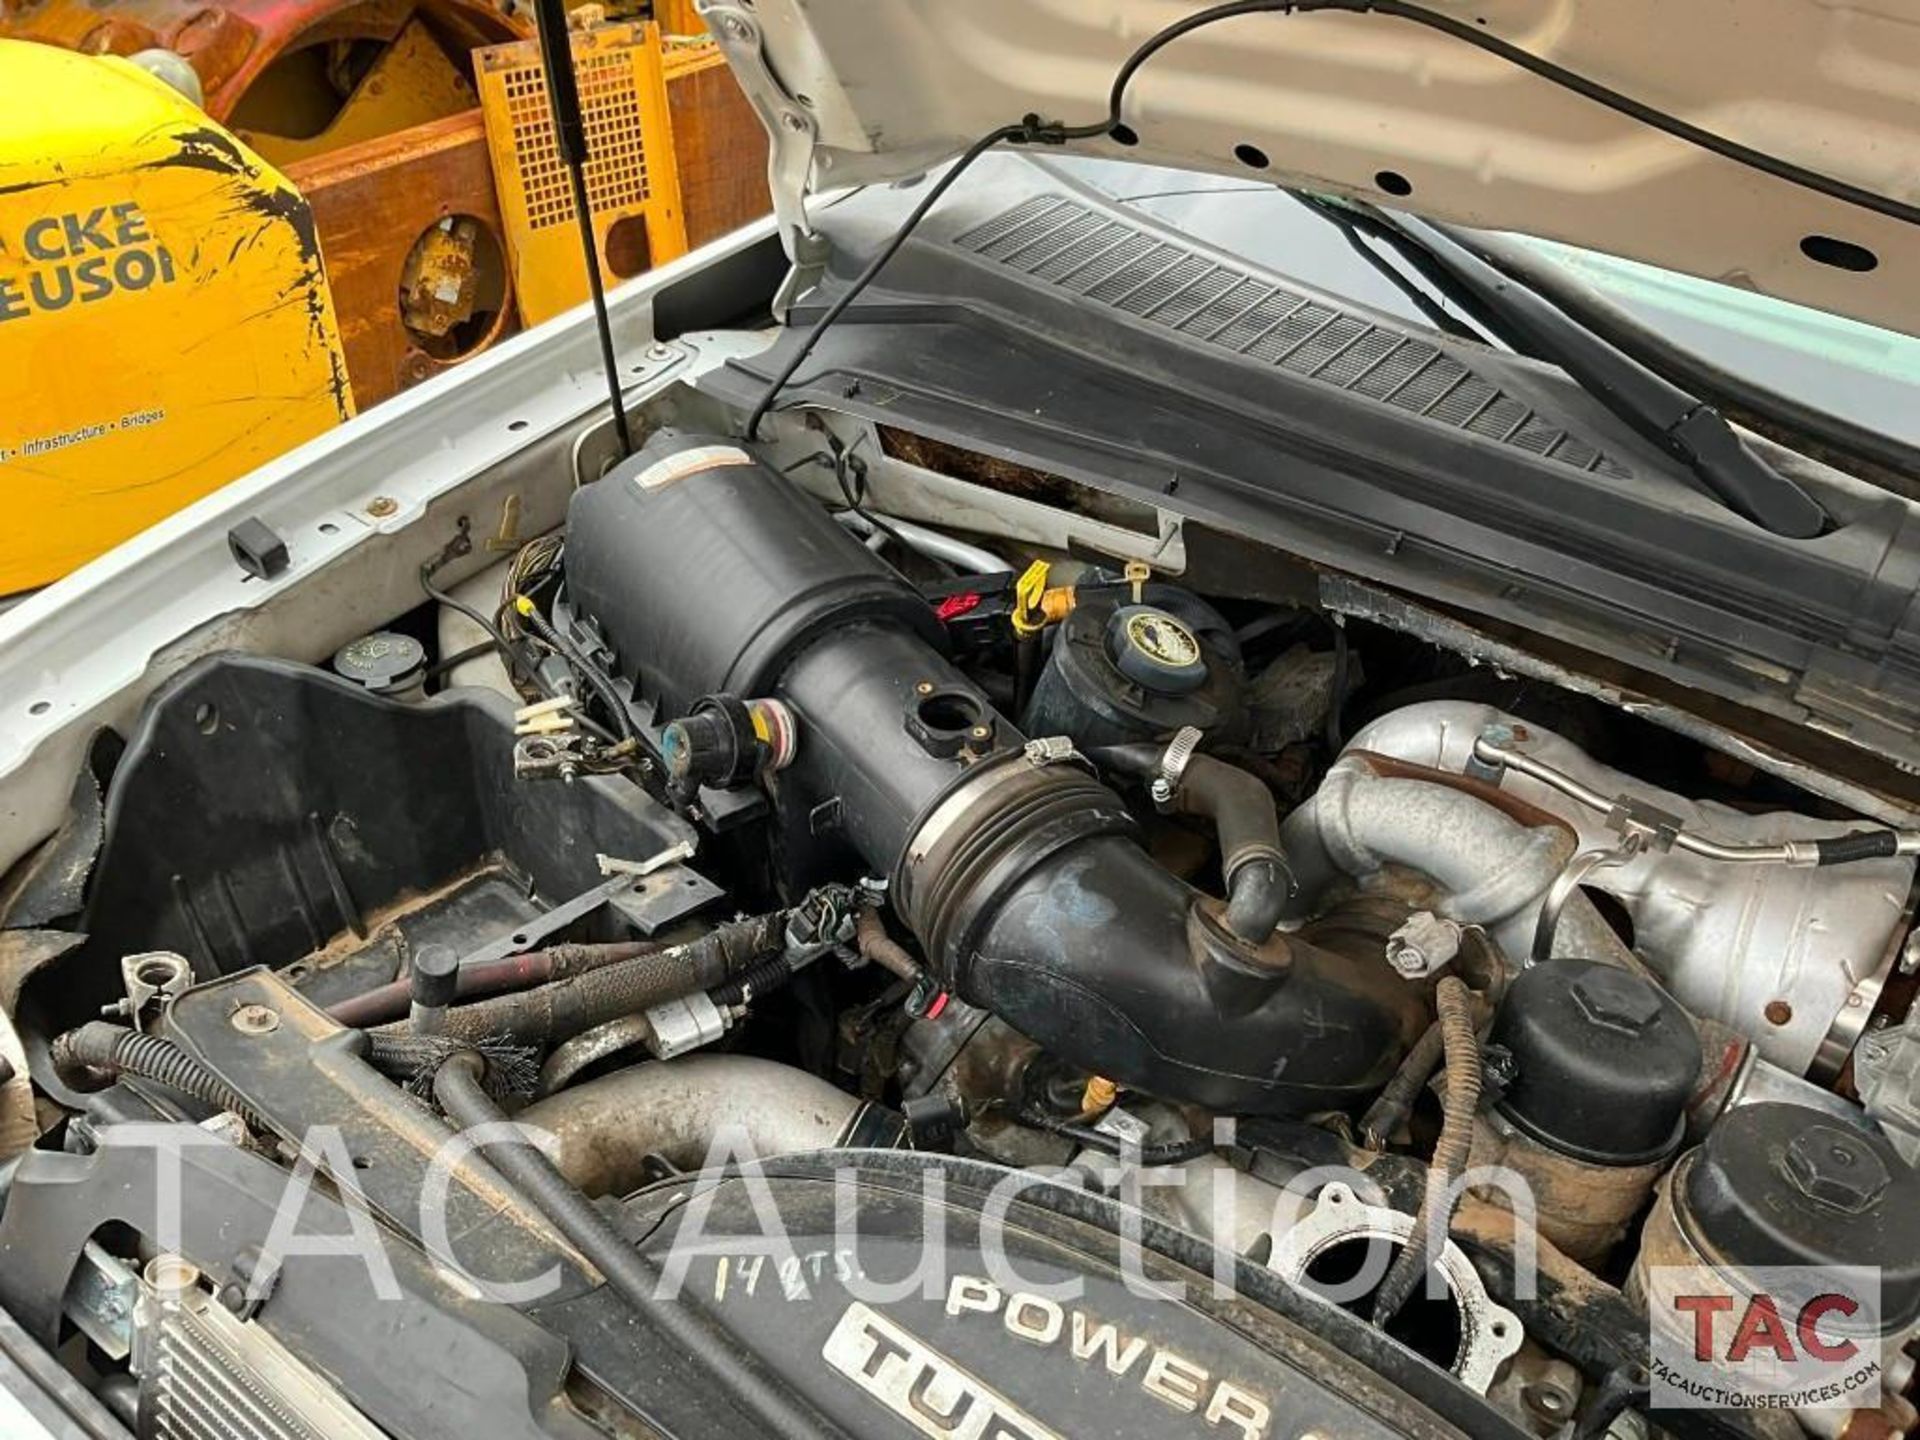 2008 Ford F-350 Super Duty Service Truck - Image 88 of 124